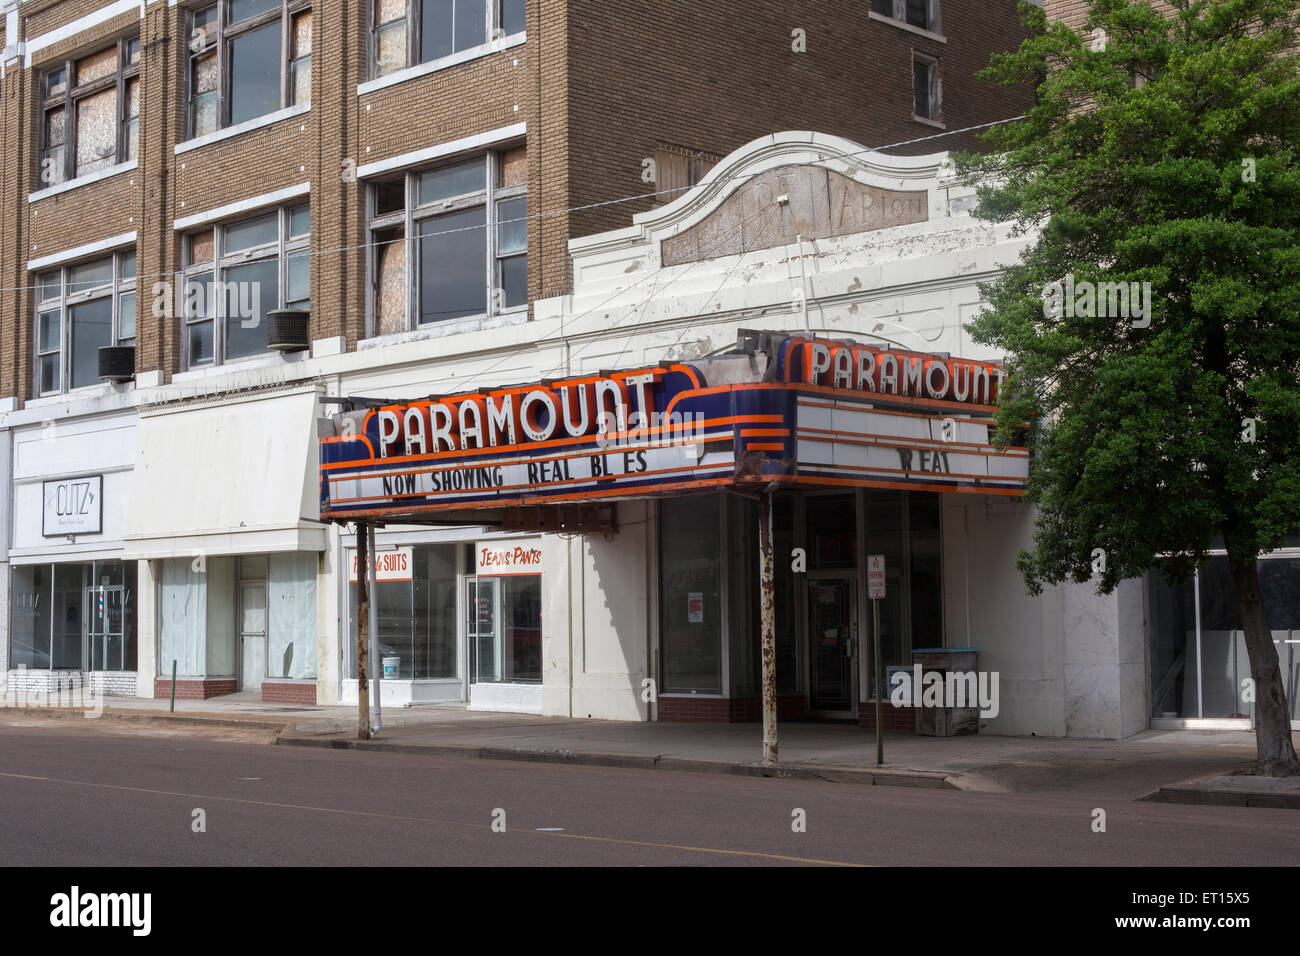 Clarksdale, Mississippi - Vacant buildings, including the Paramount Theater, now showing 'Real Blues.' Stock Photo